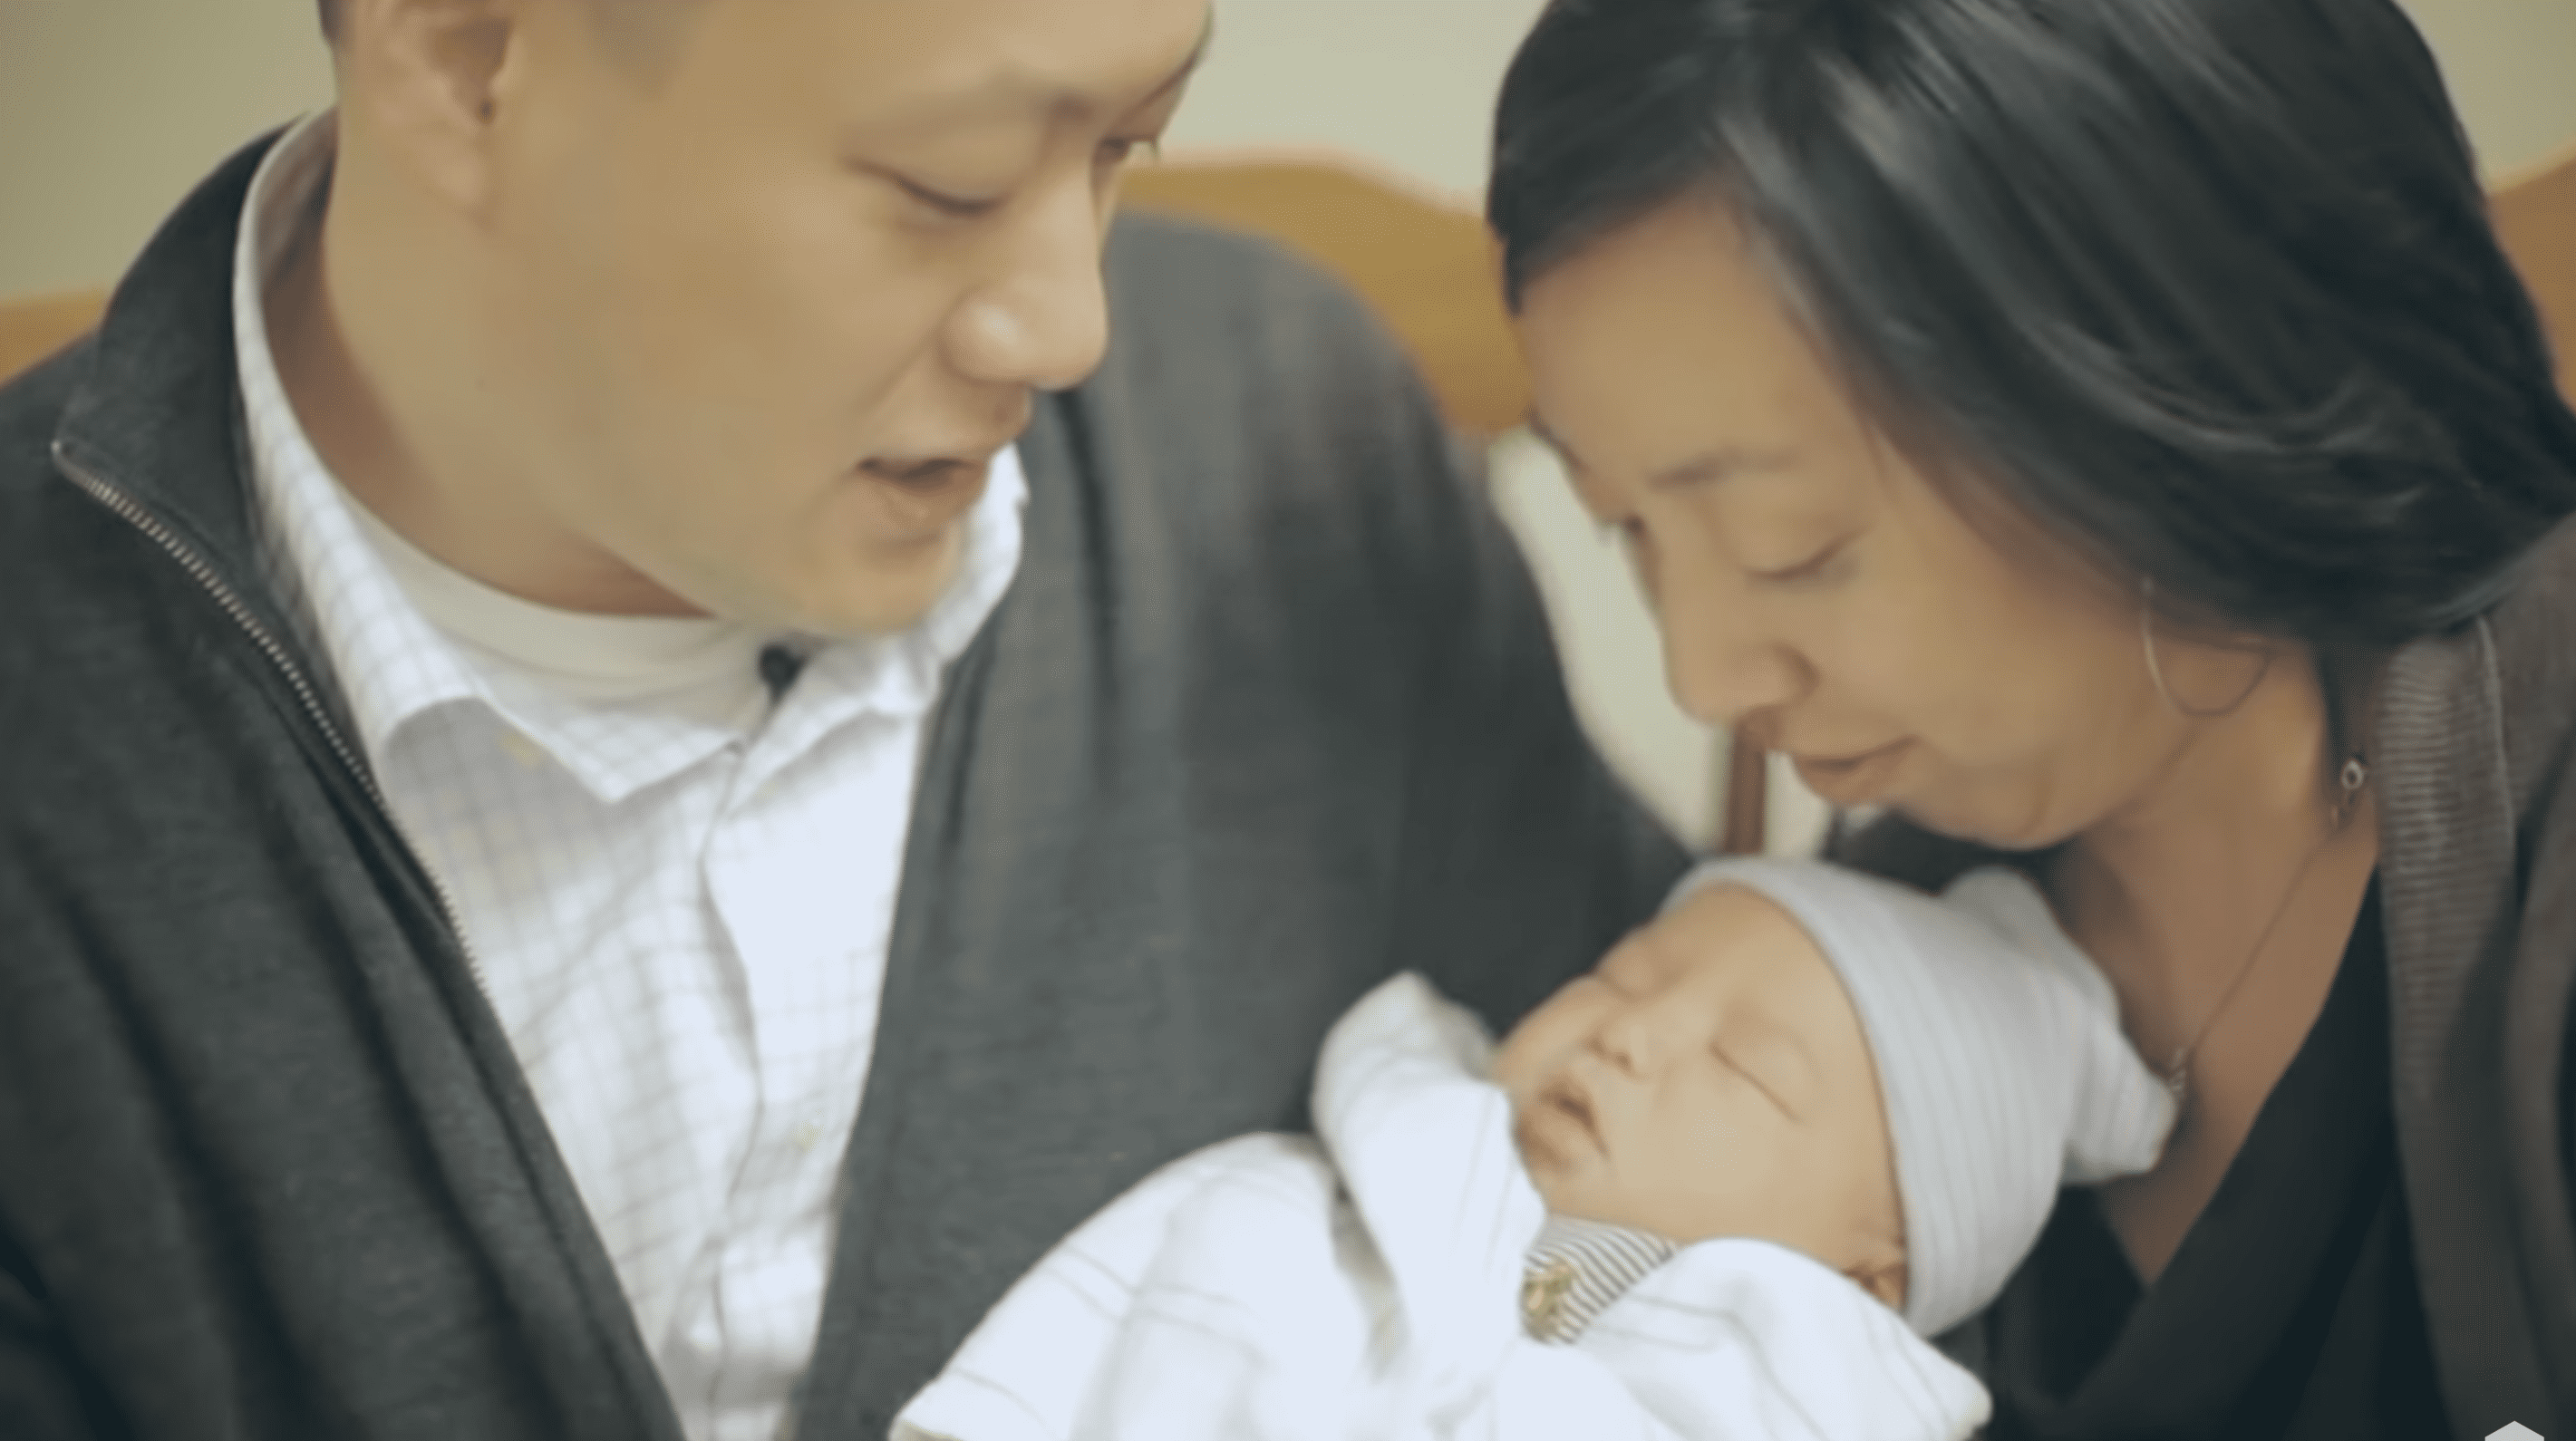 The heart-touching moments when the Chen family held their son in the hospital. | Photo: YouTube.com/The Austin Stone